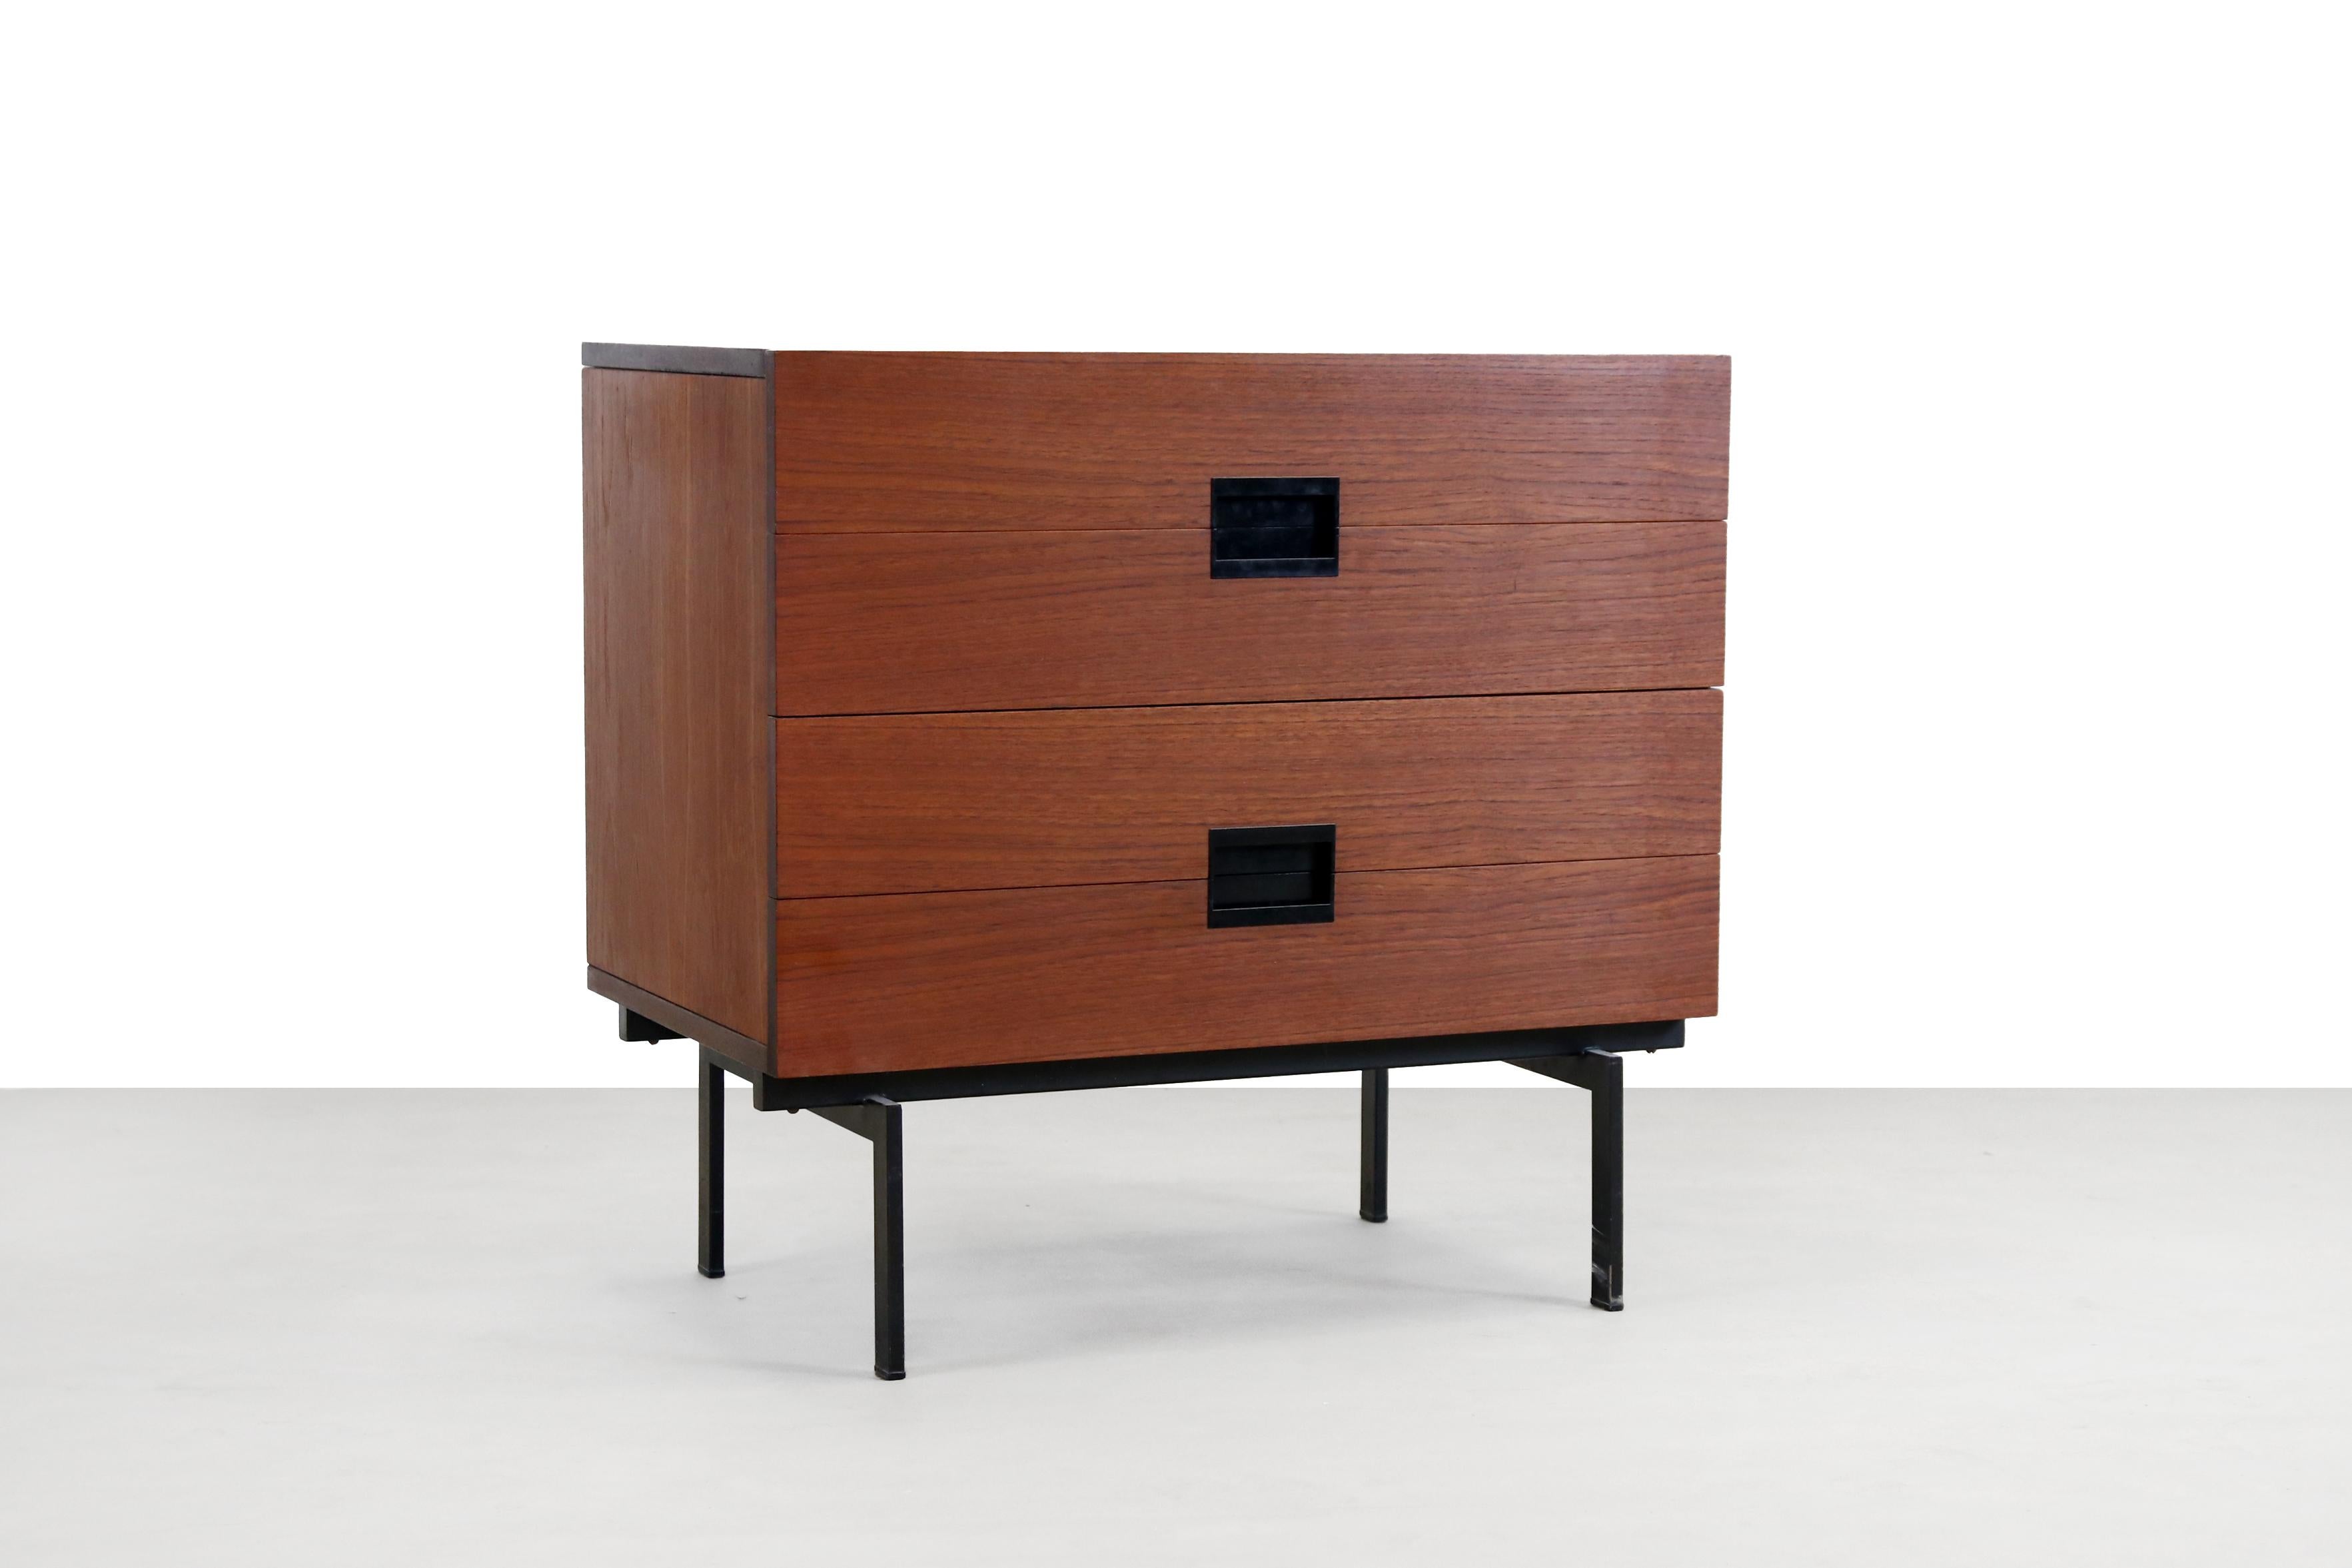 Very nice chest of drawers from the so-called Japanese Series designed by Cees Braakman and manufactured by UMS Pastoe in the 1950s. This cabinet is not only beautiful but also offers a lot of storage space. The teak cabinet has four curved plywood